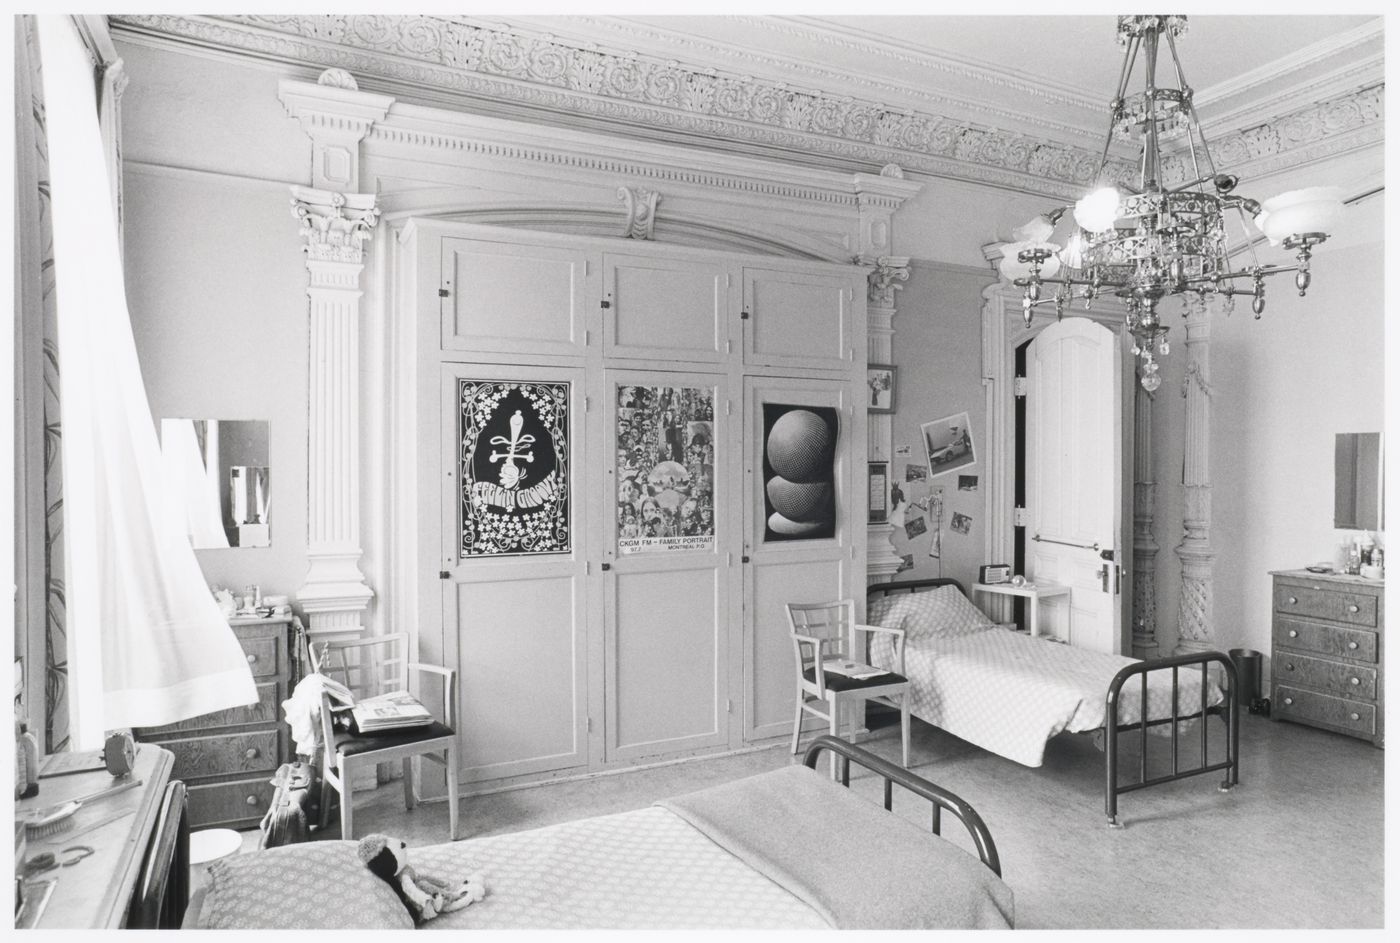 Interior view of the front room in the west part of Shaughnessy House, Montréal, Québec